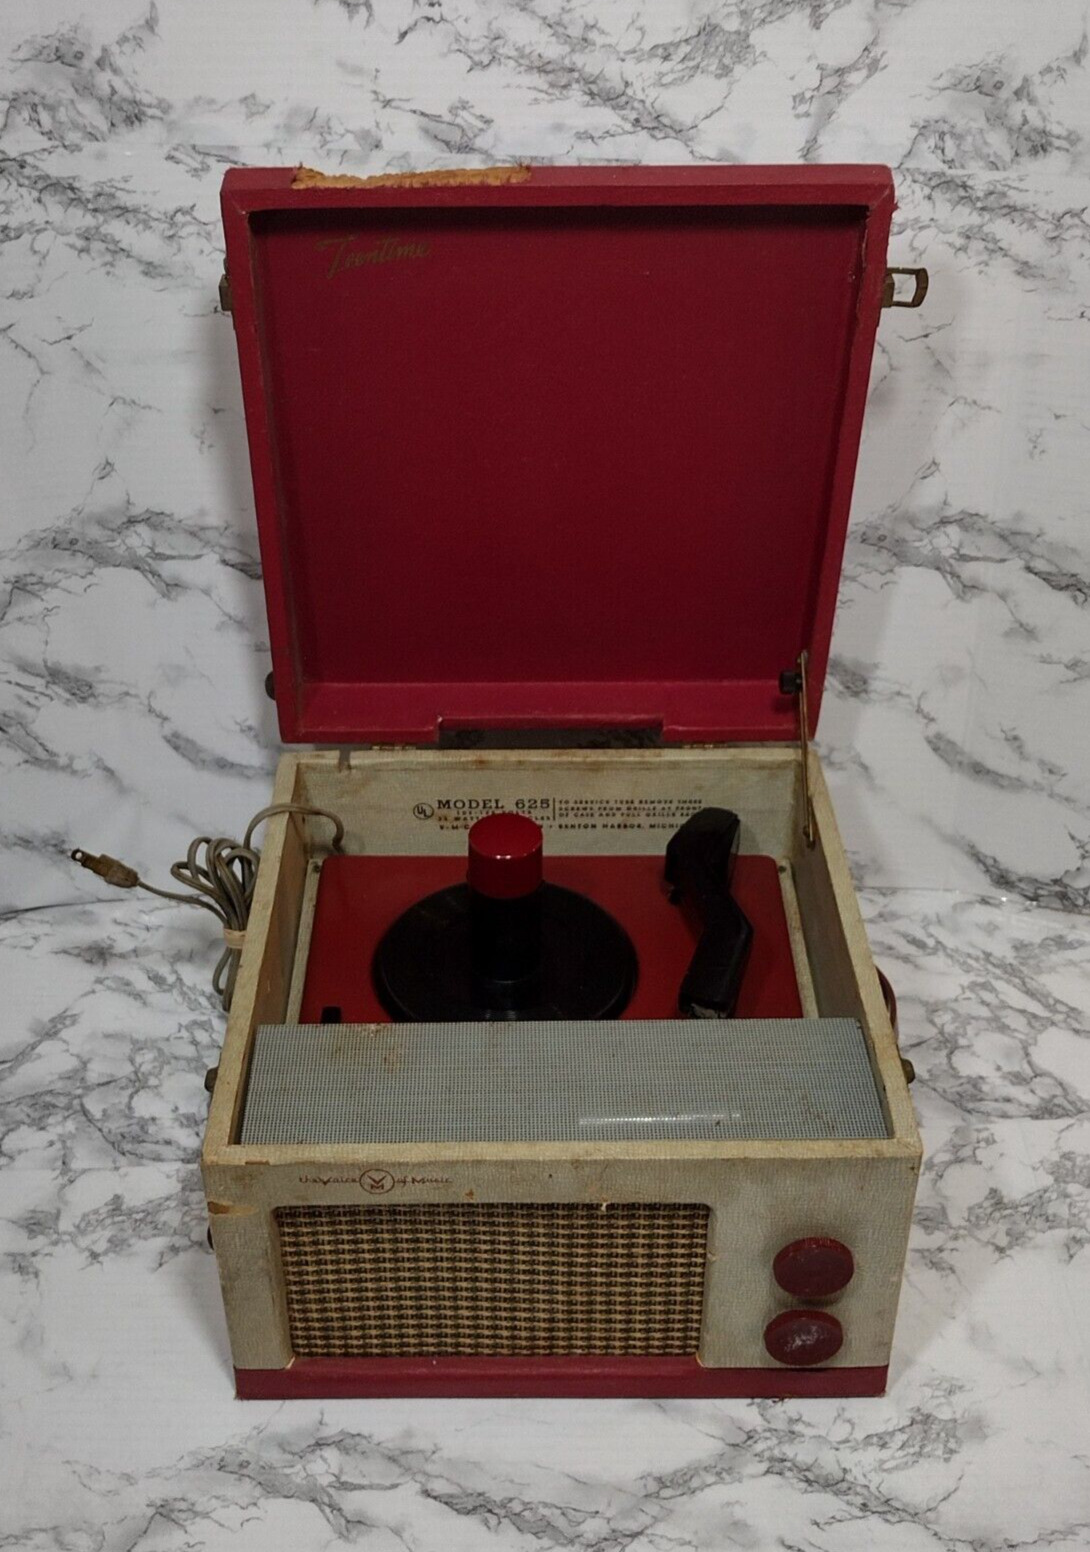 Teentime VM Voice of Music Record Player Model 625 Turntable Vintage 1956 Red